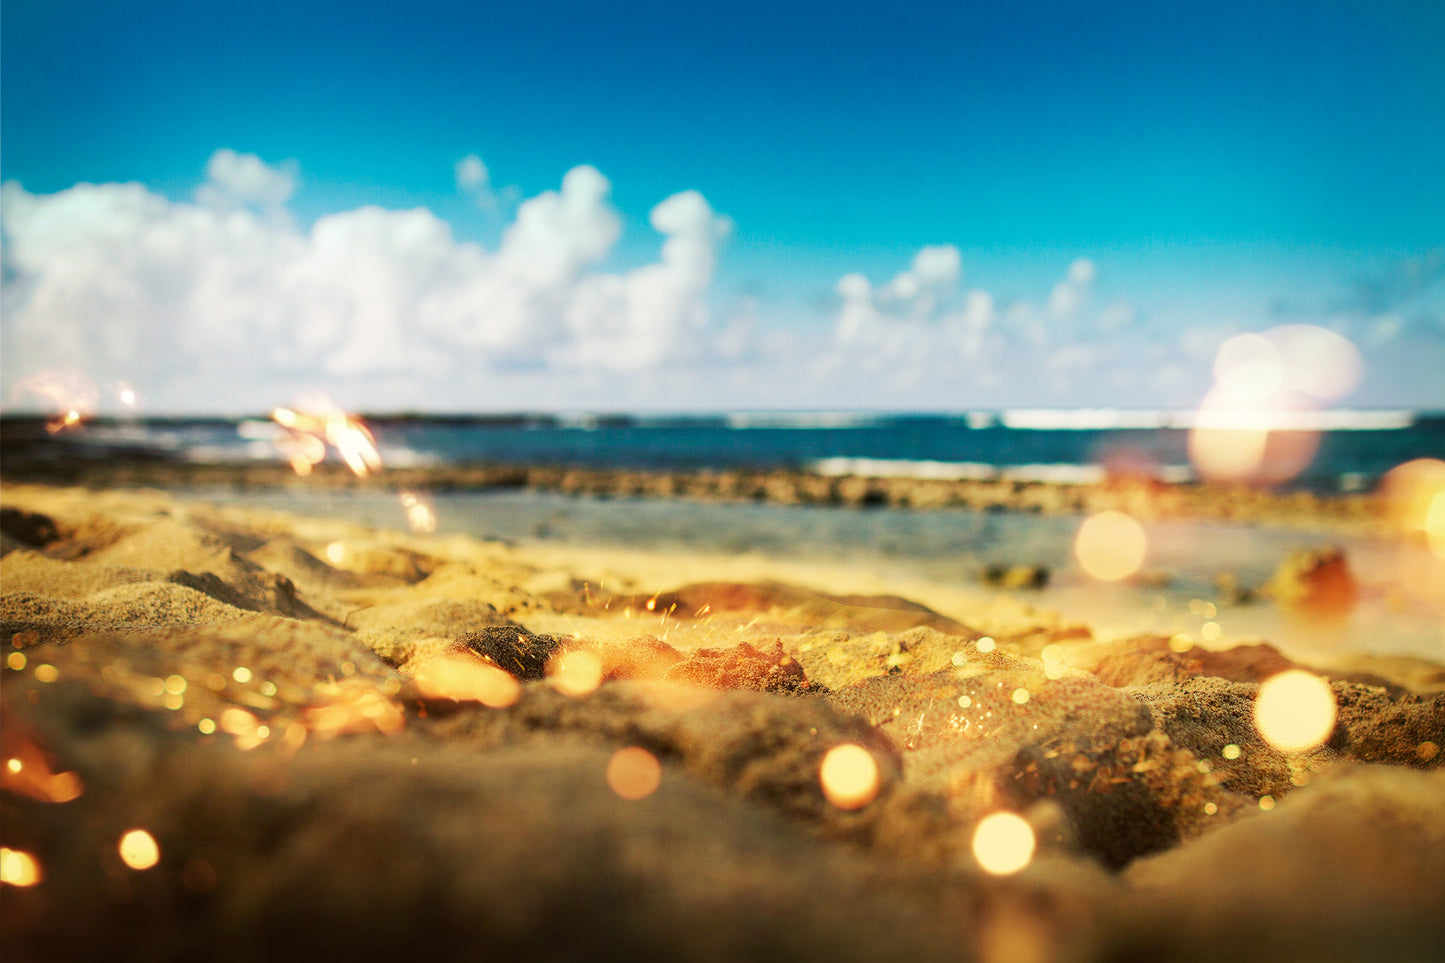 "Spark #1" is a fine art photograph that transports viewers to the serene shores of a beach in Hawaii. Shot at sand level, the image creates a unique perspective where only a small plane of focus is available, enveloping the scene with a dreamlike quality. The golden yellow sand stretches into the distance, contrasting beautifully against the deep blue sky. By Shannon Black